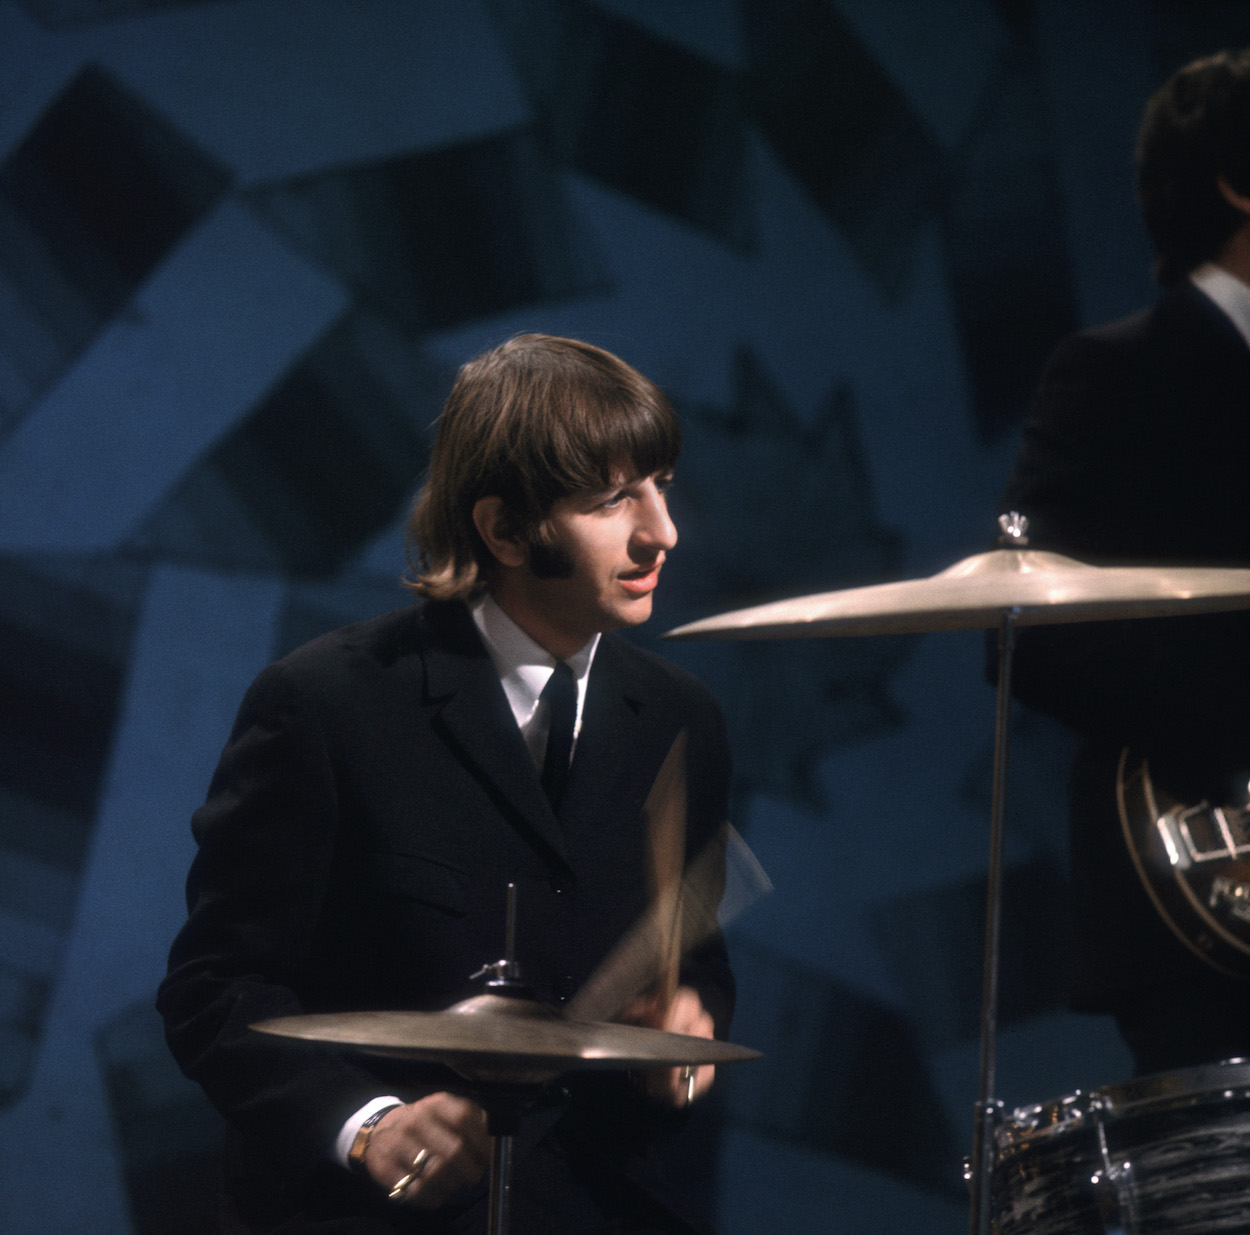 Ringo Starr, who once said he as no good as a drummer (and was later proven wrong), plays with The Beatles on 'Top of the Pops' in 1966.